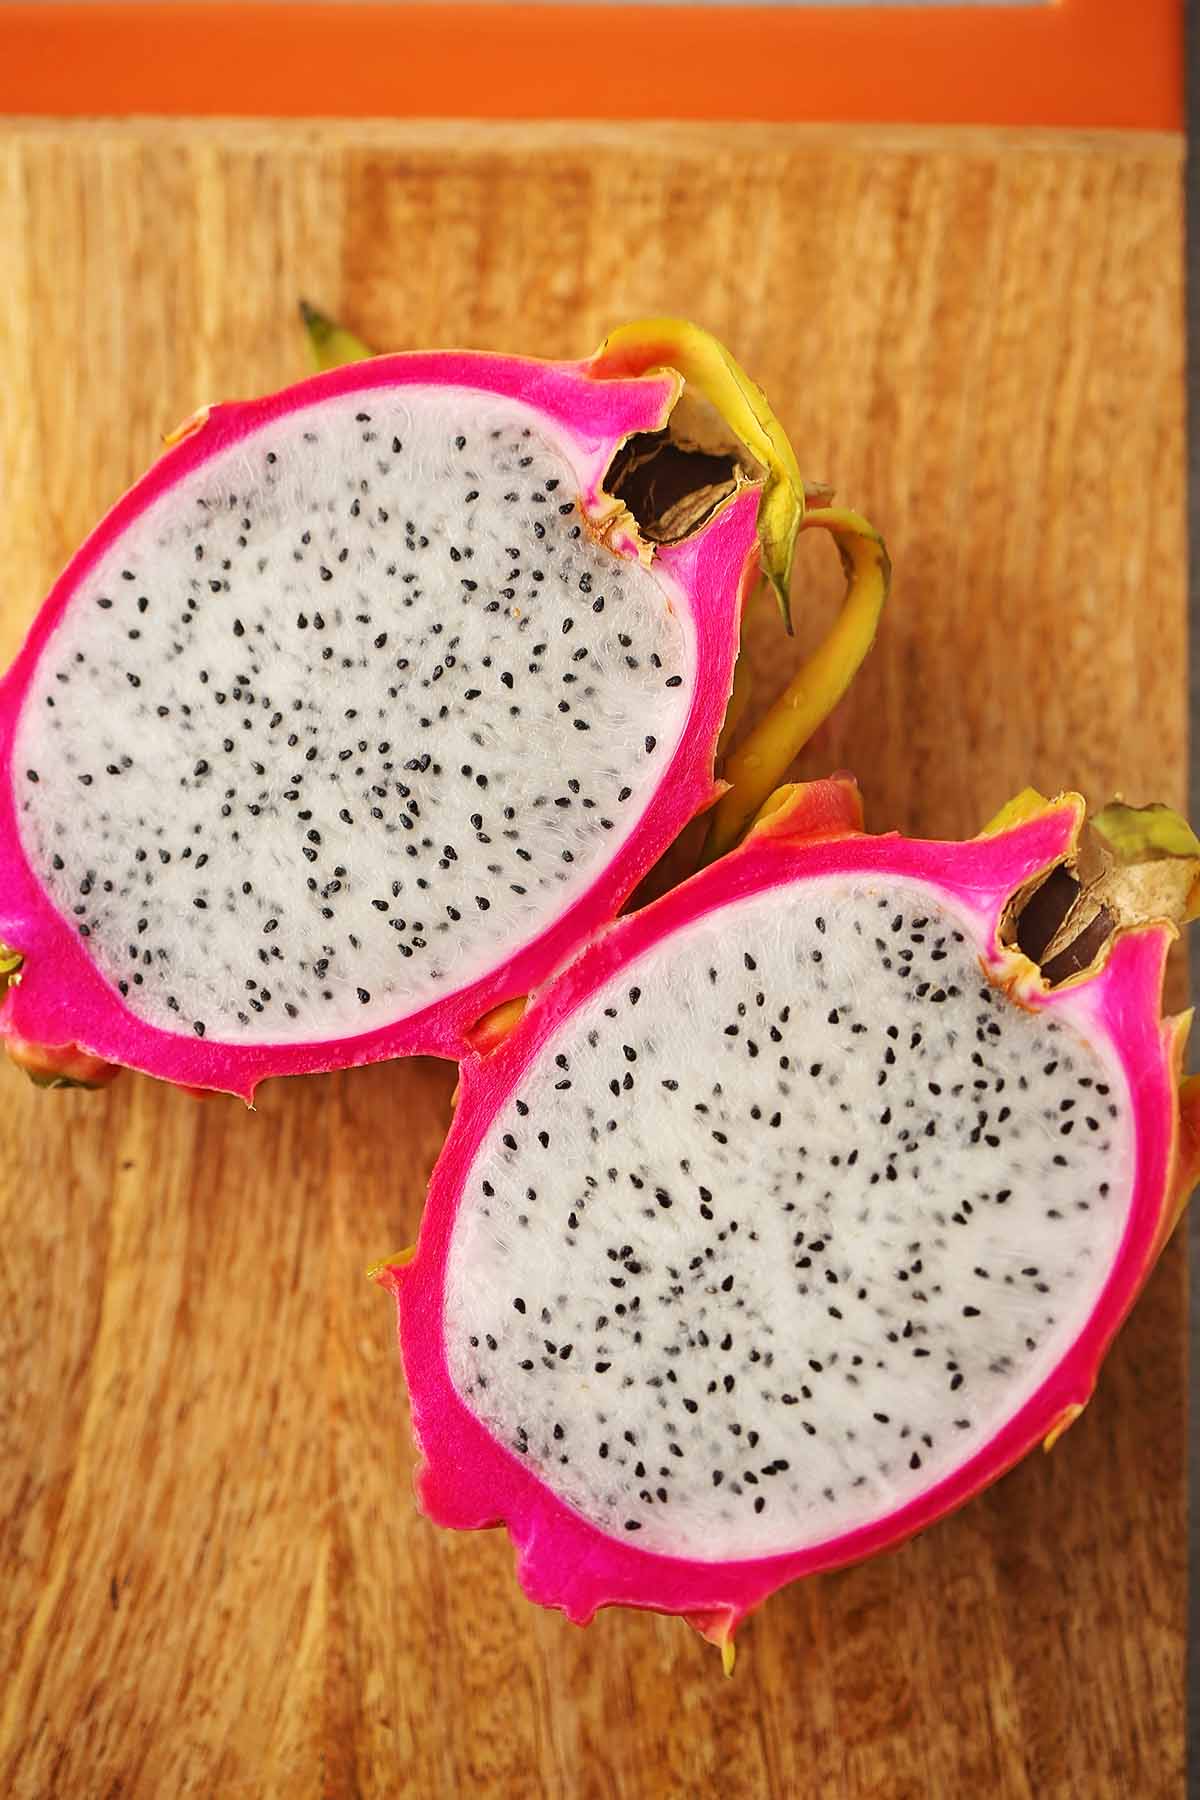 cutting board with sliced in half dragon fruit with white flesh